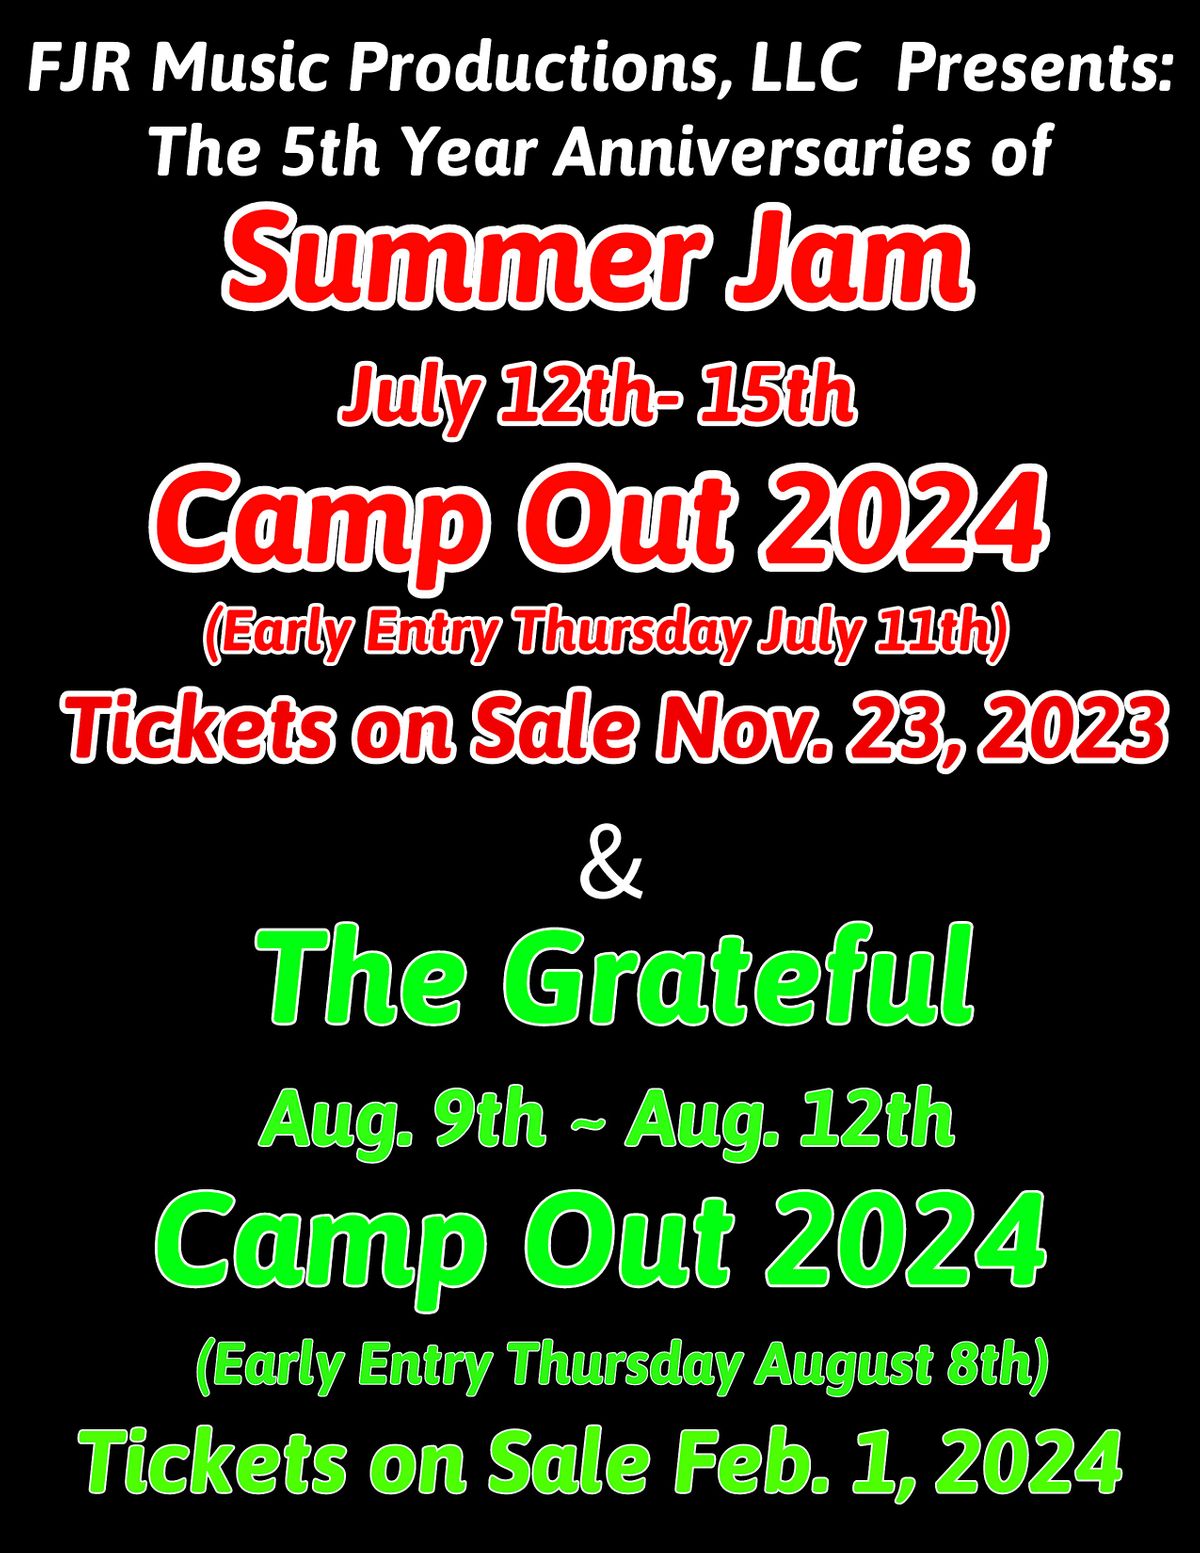 Summer Jam Camp Out 2024